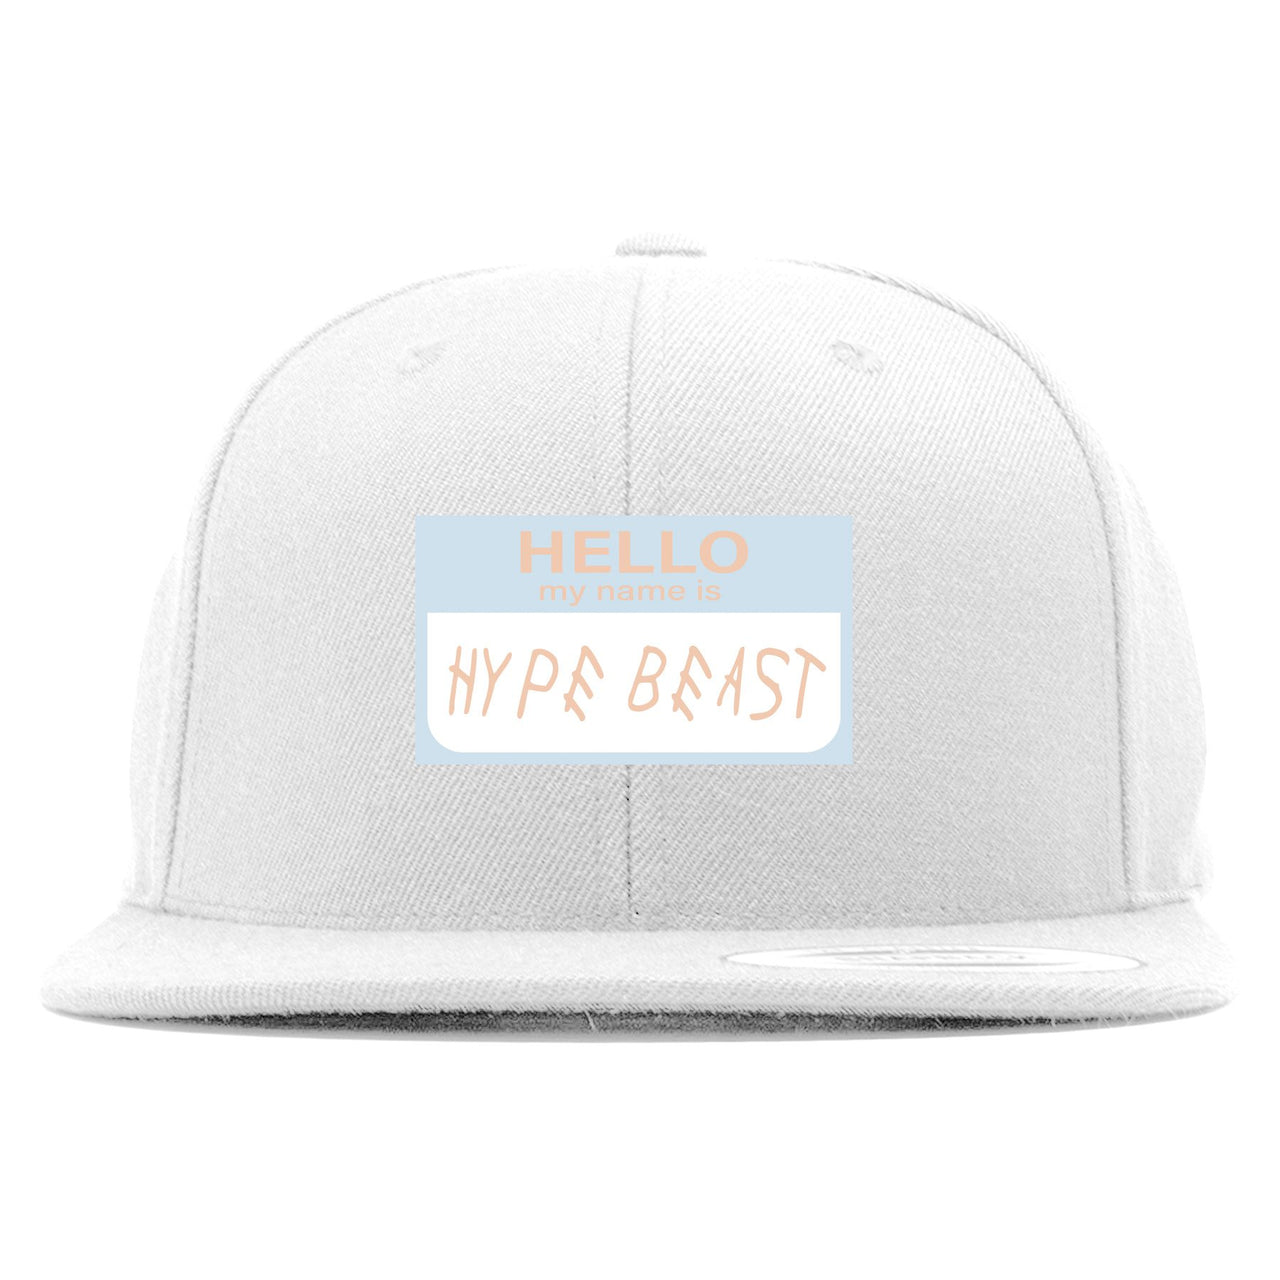 Hyperspace 350s Snapback | Hello My Name Is Hype Beast Woe, White